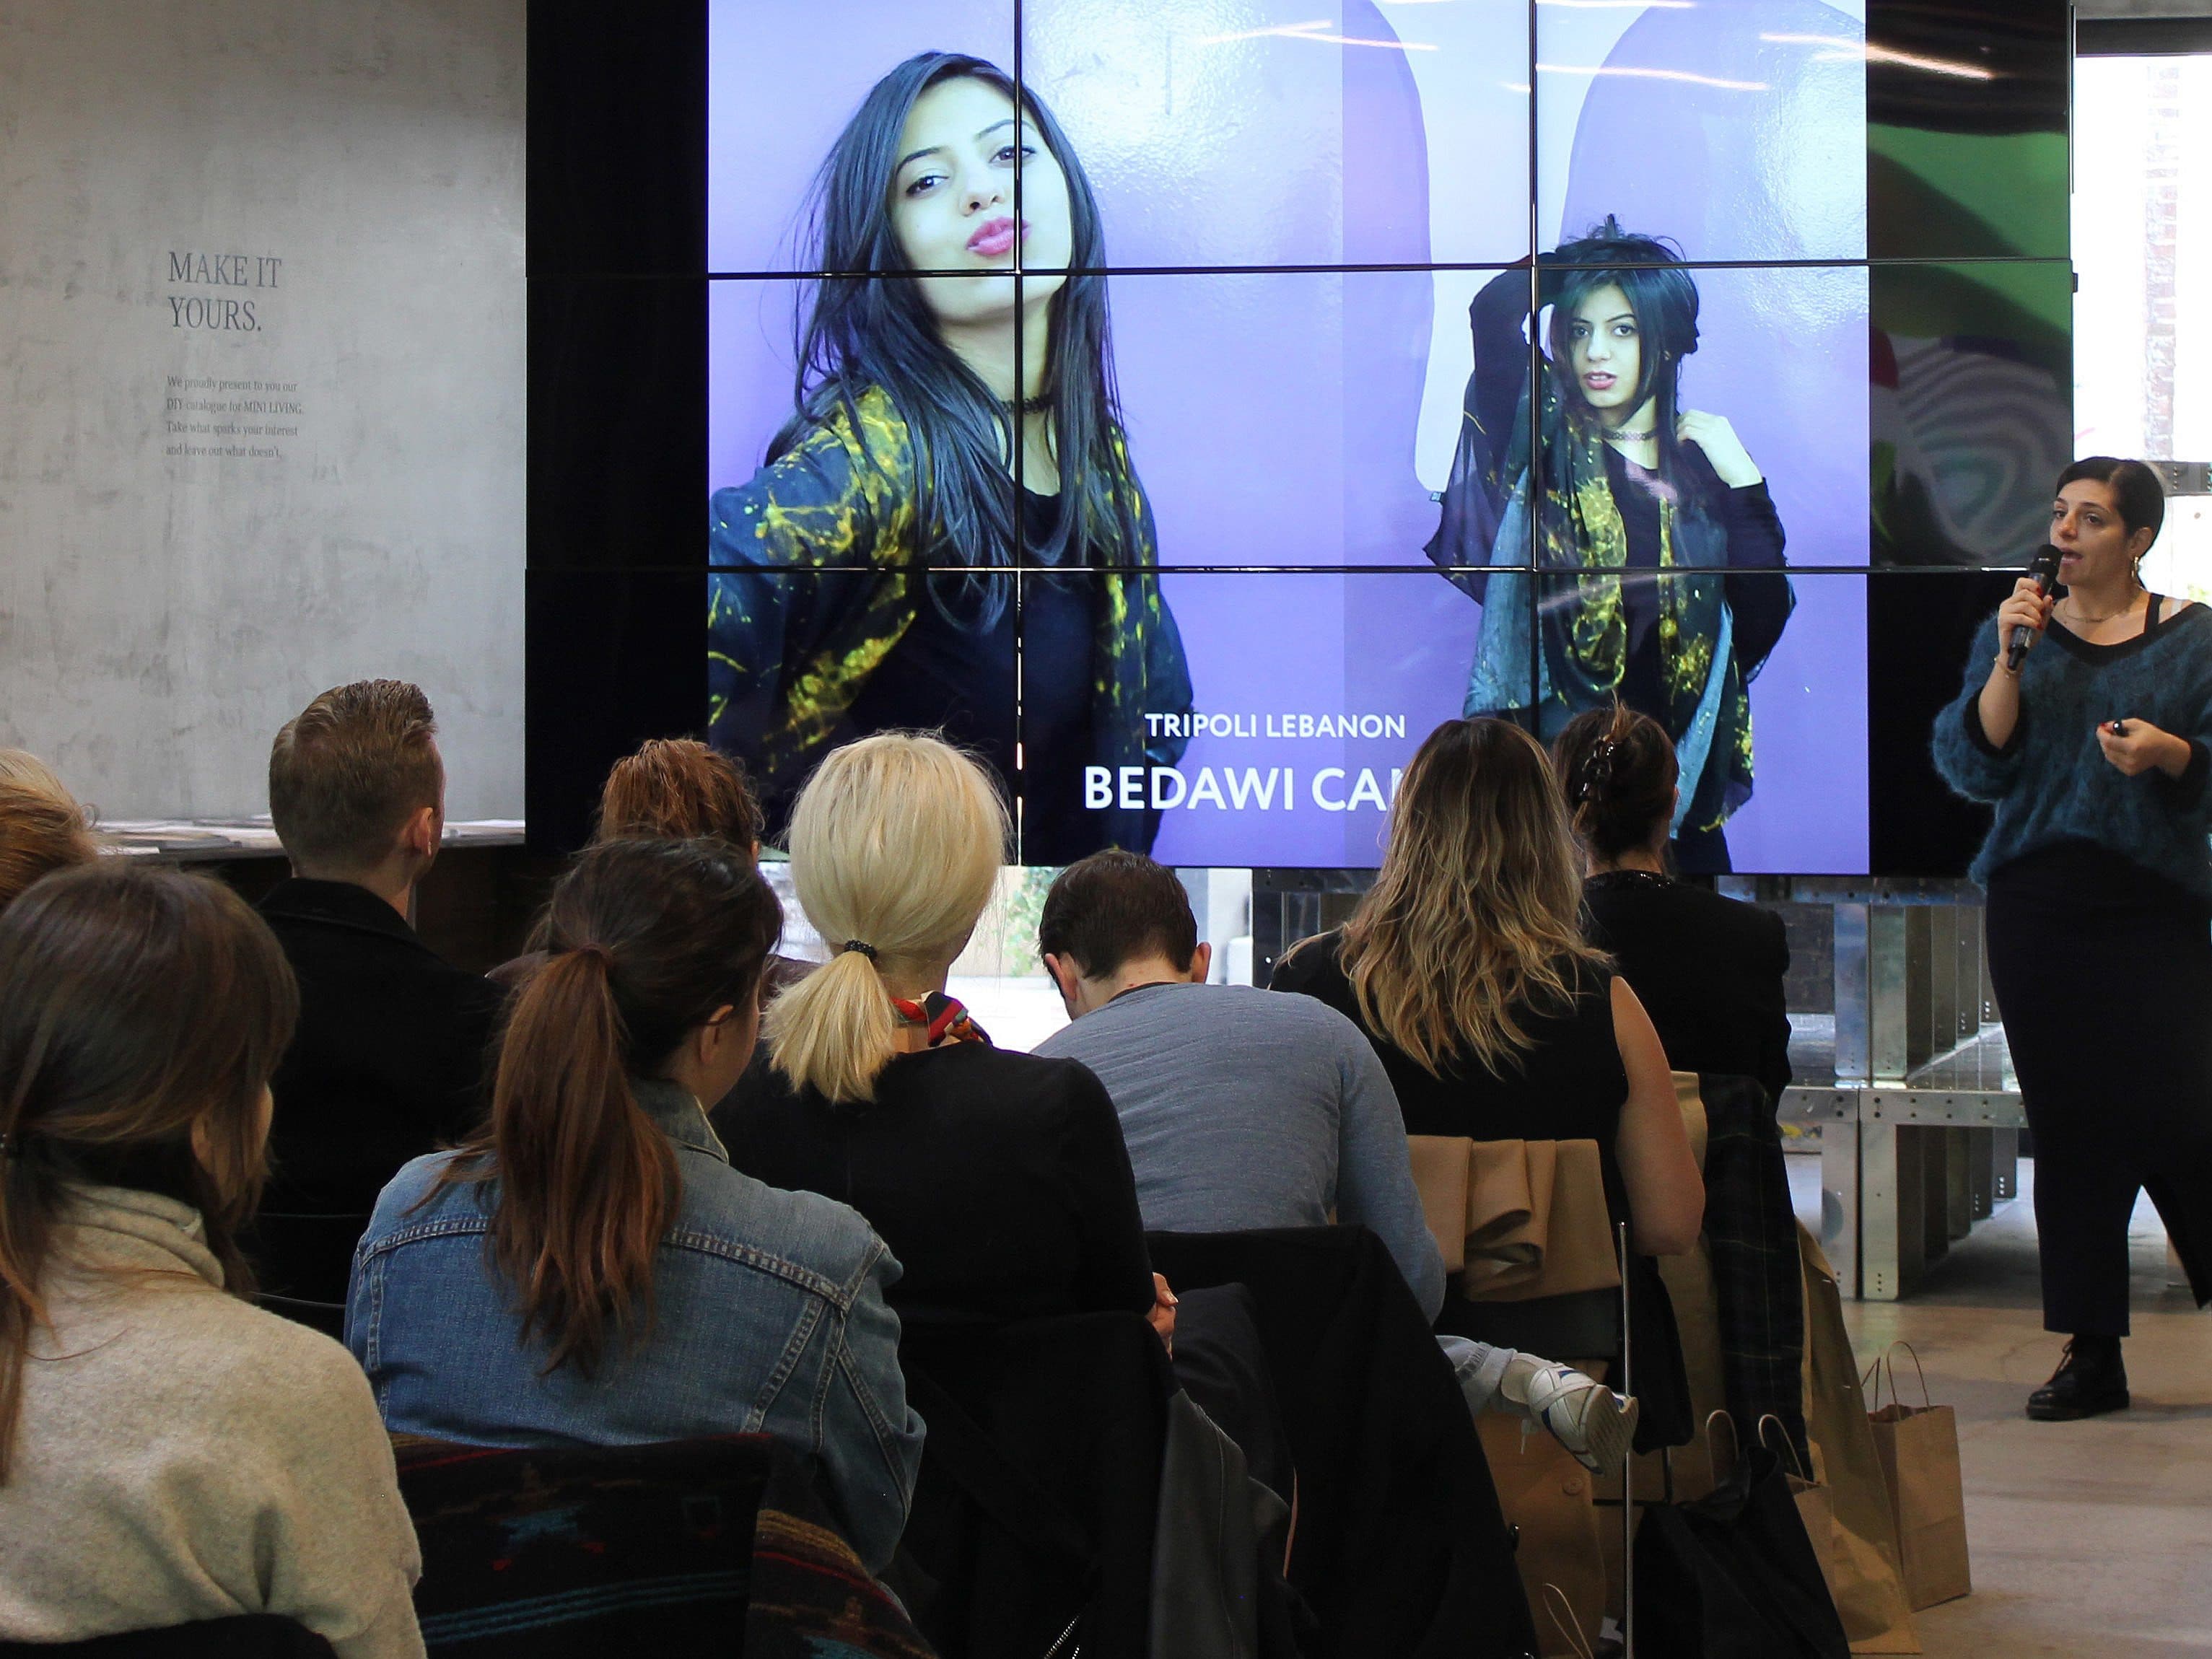 A woman is speaking into a microphone in front of an audience seated in a modern indoor space. Behind her is a large screen displaying images of another woman posing, labeled "Tripoli Lebanon Bedawi Camp." The audience appears to be focused on the presentation.